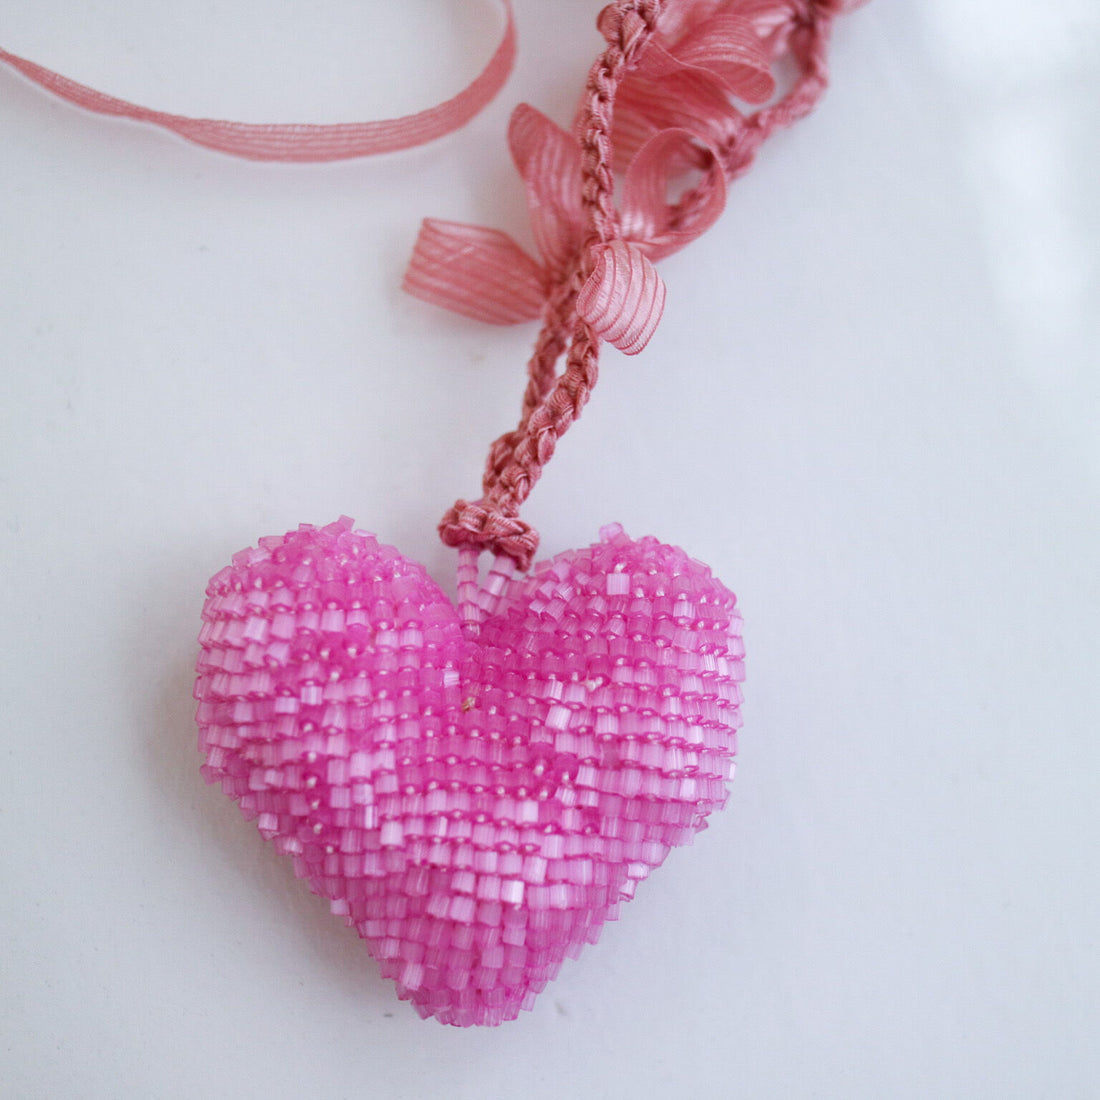 APROSIO&CO  BIG HEART NECKLACE